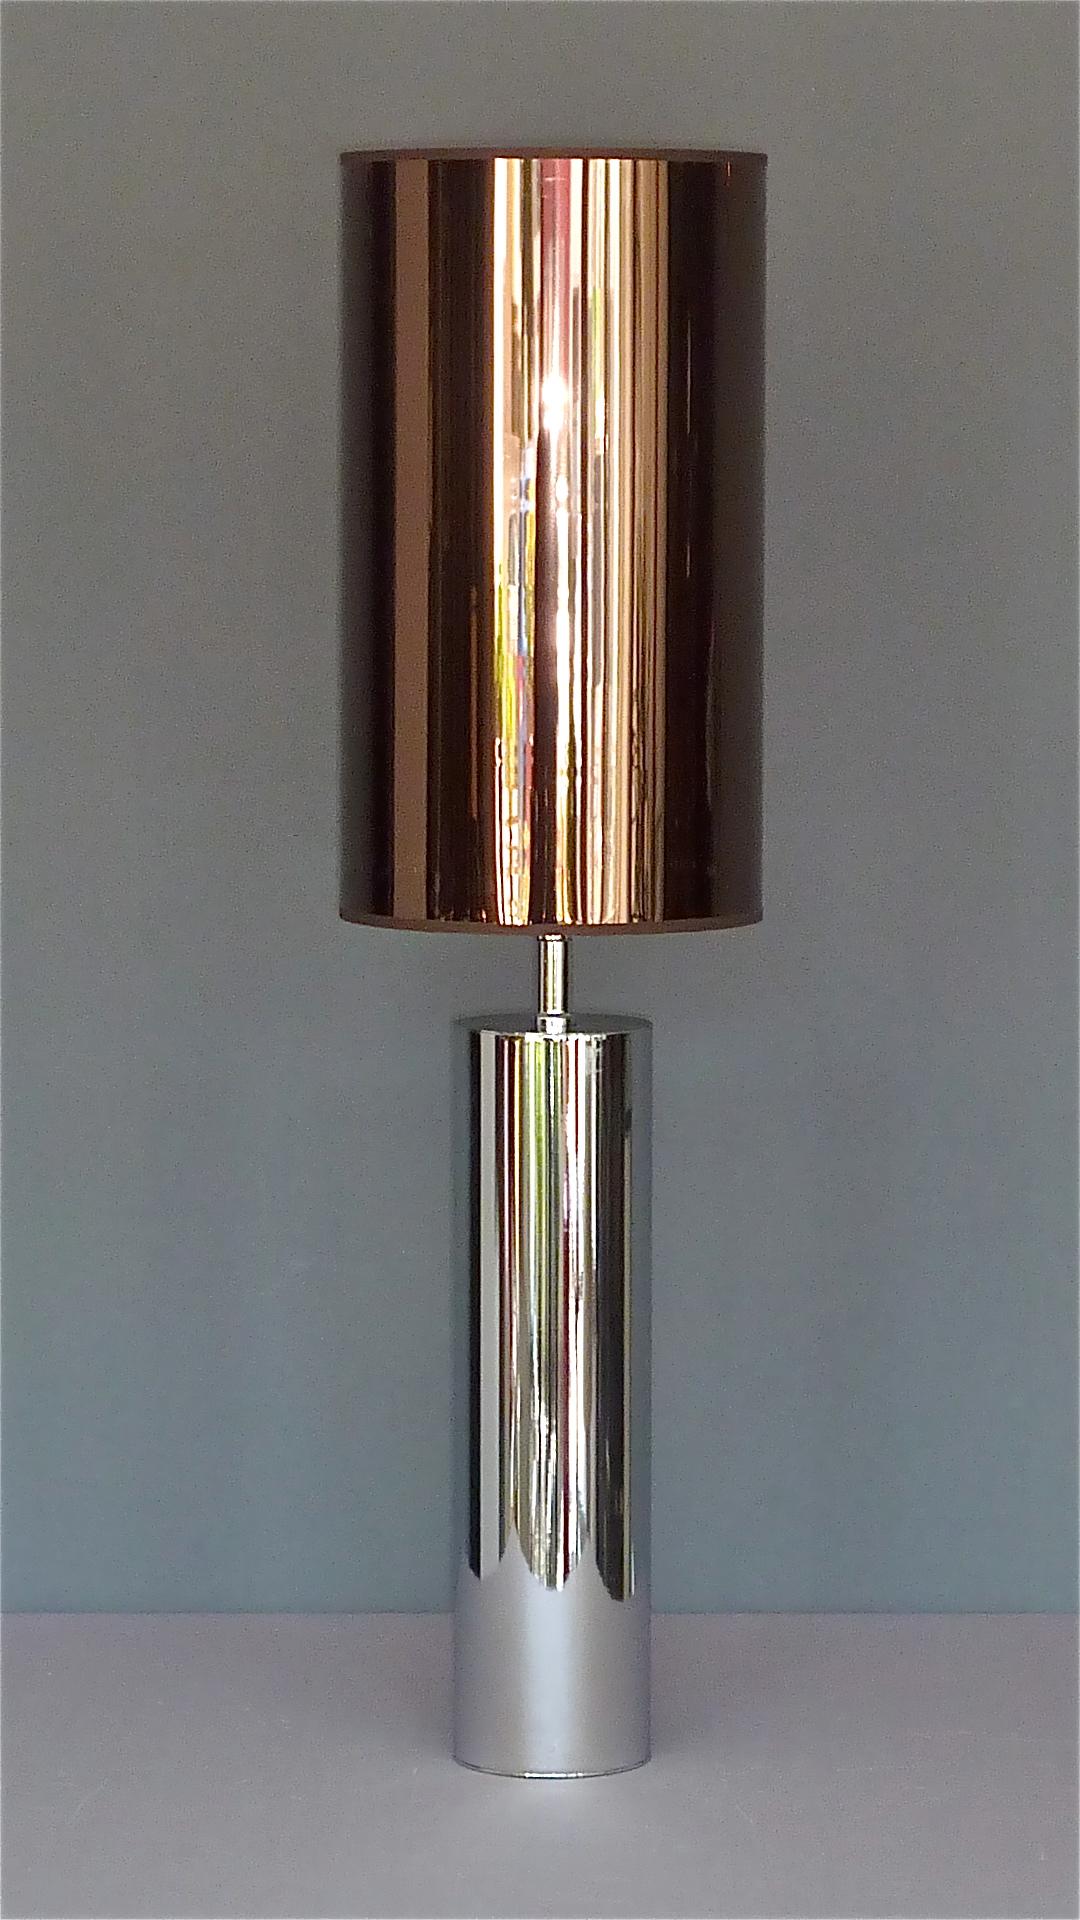 Monumental Chrome Steel Table Lamp Willy Rizzo Cardin Style Bronze Mirror 1970s In Good Condition For Sale In Nierstein am Rhein, DE